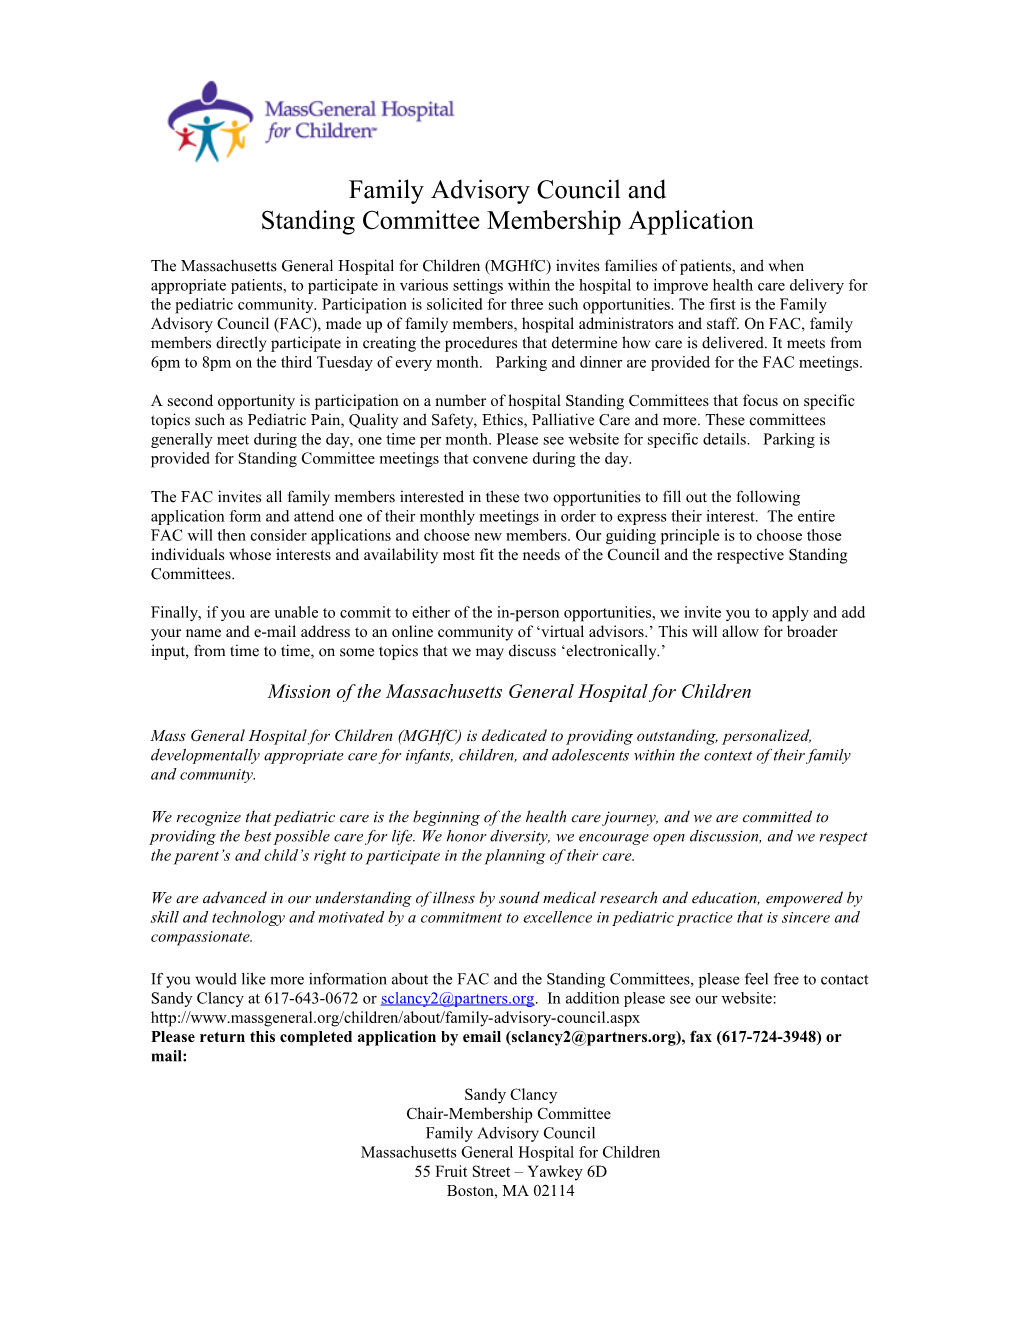 Family Advisory Council and Standing Committee Membership Application